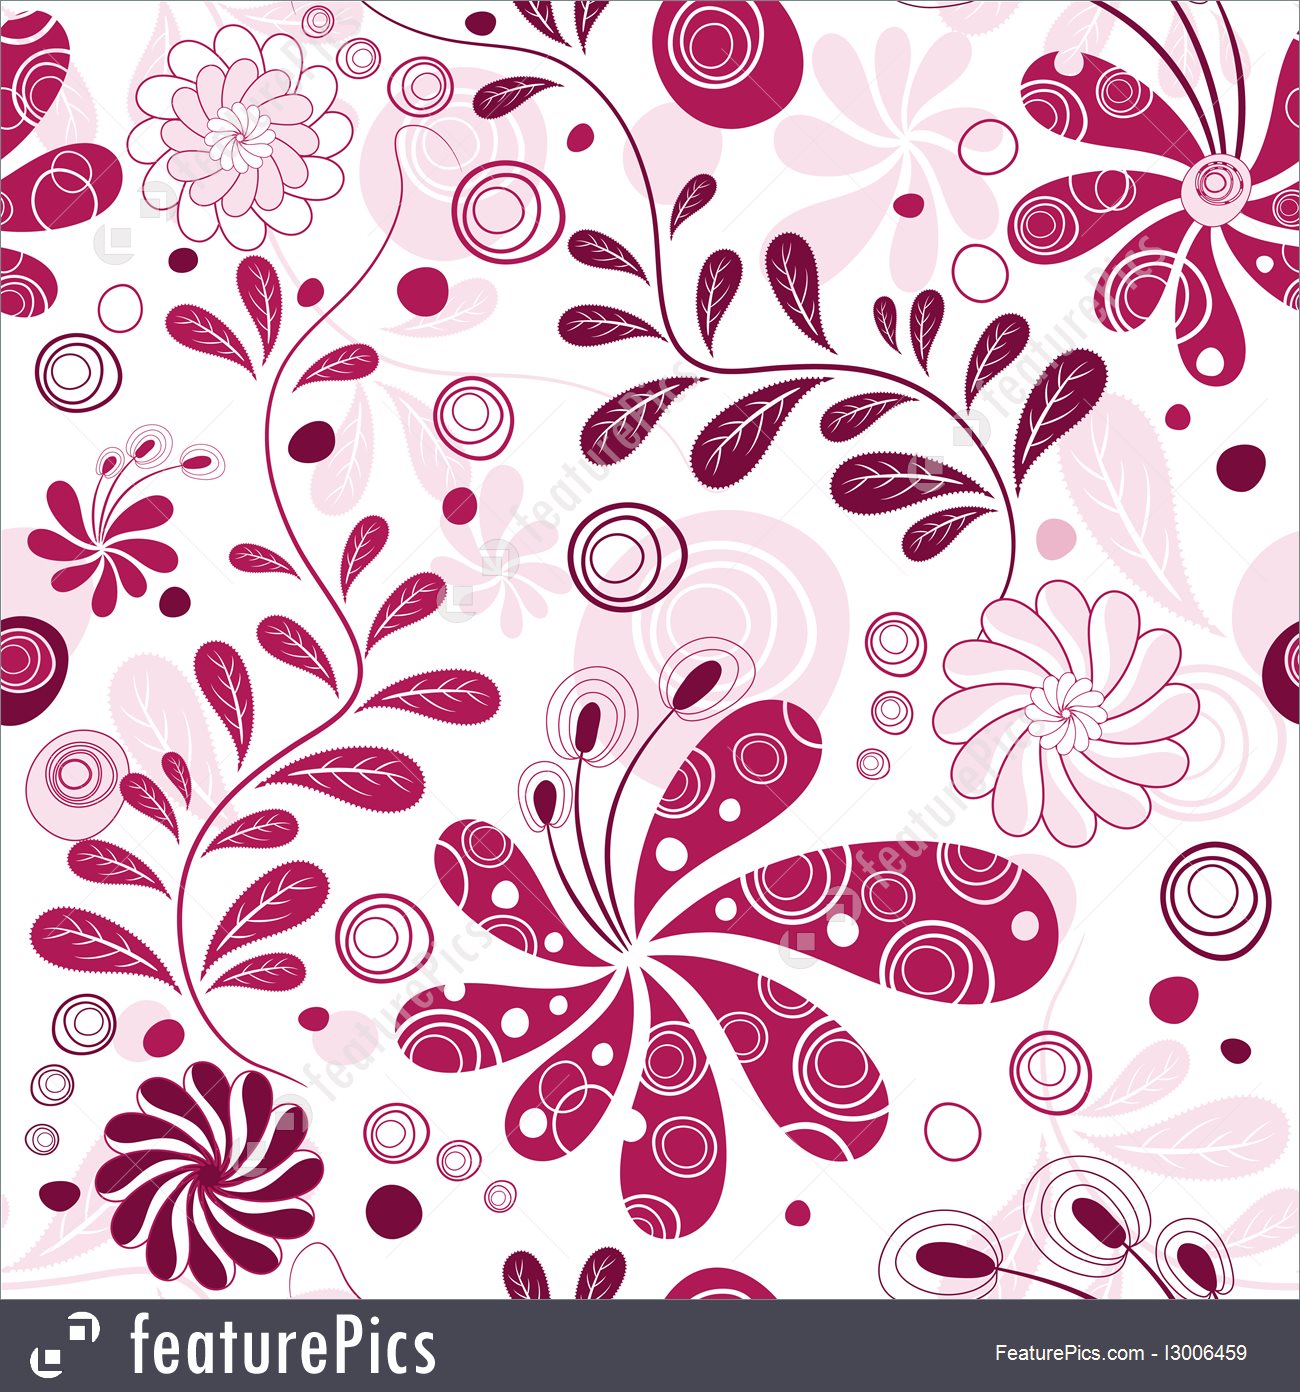 White And Purple Effortless Floral Wallpaper With Flowers - White And Pink Abstract Floral - HD Wallpaper 